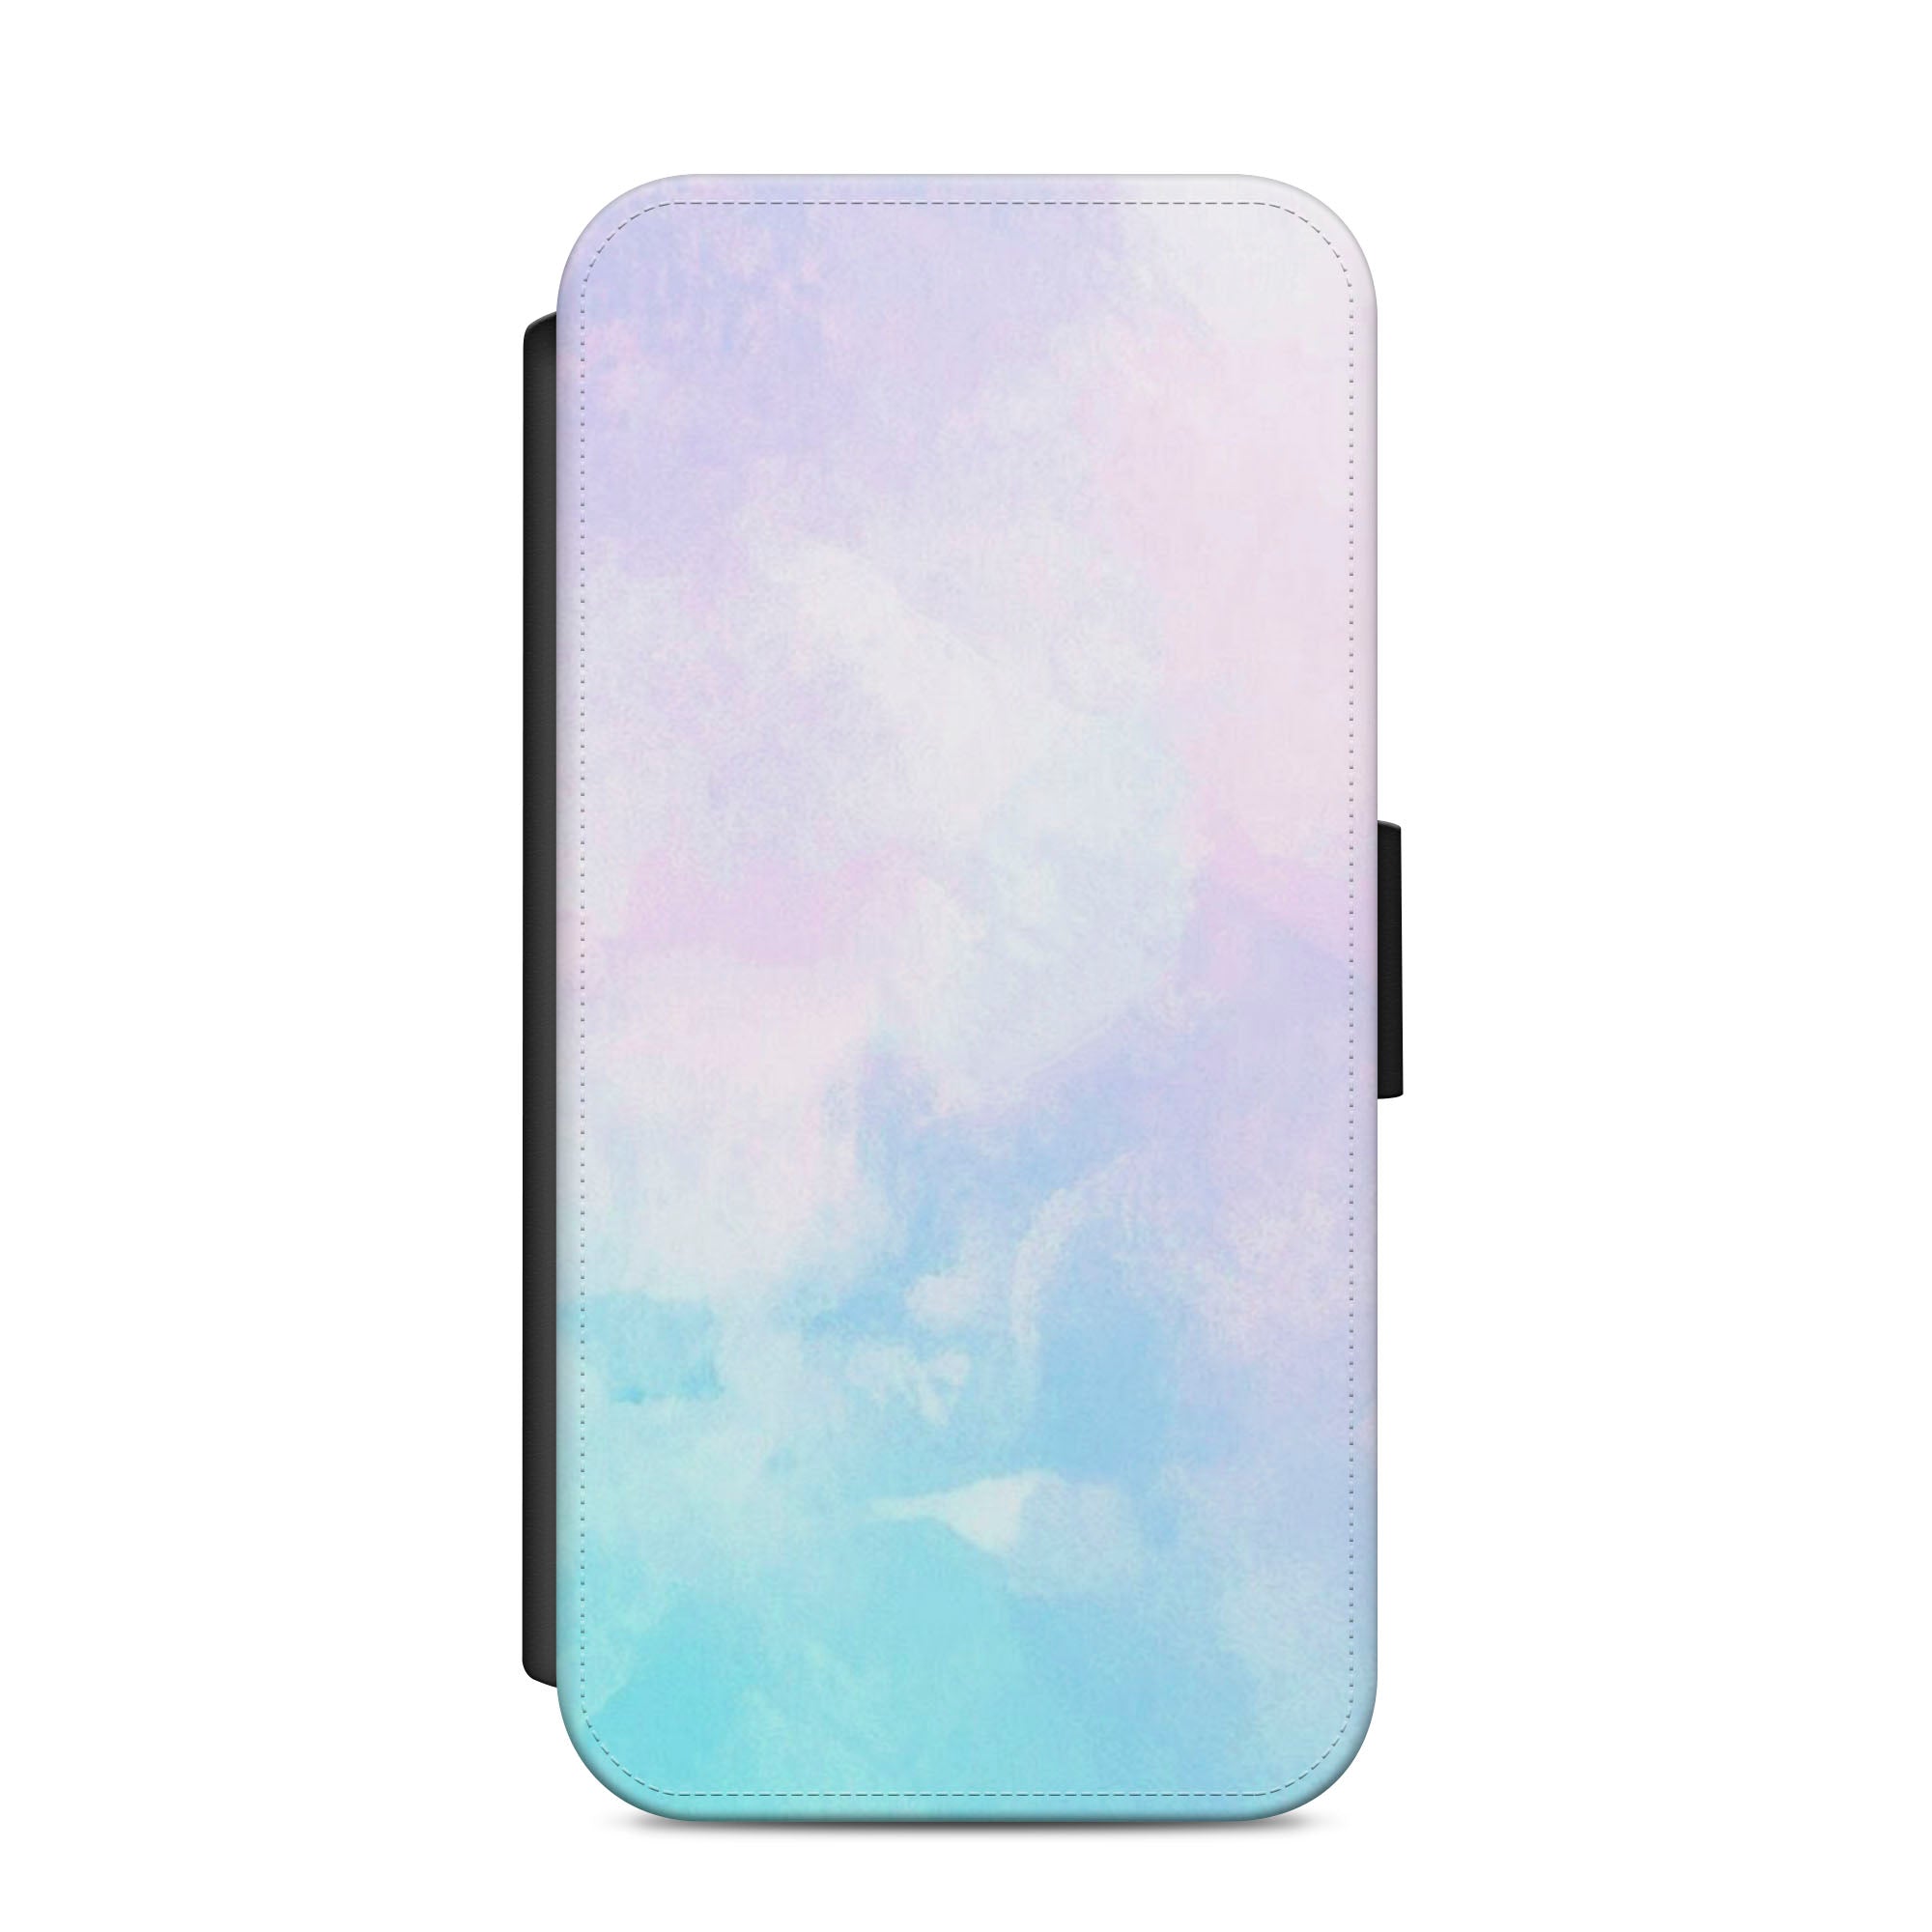 Colourful Watercolour Faux Leather Flip Case Wallet for iPhone / Samsung